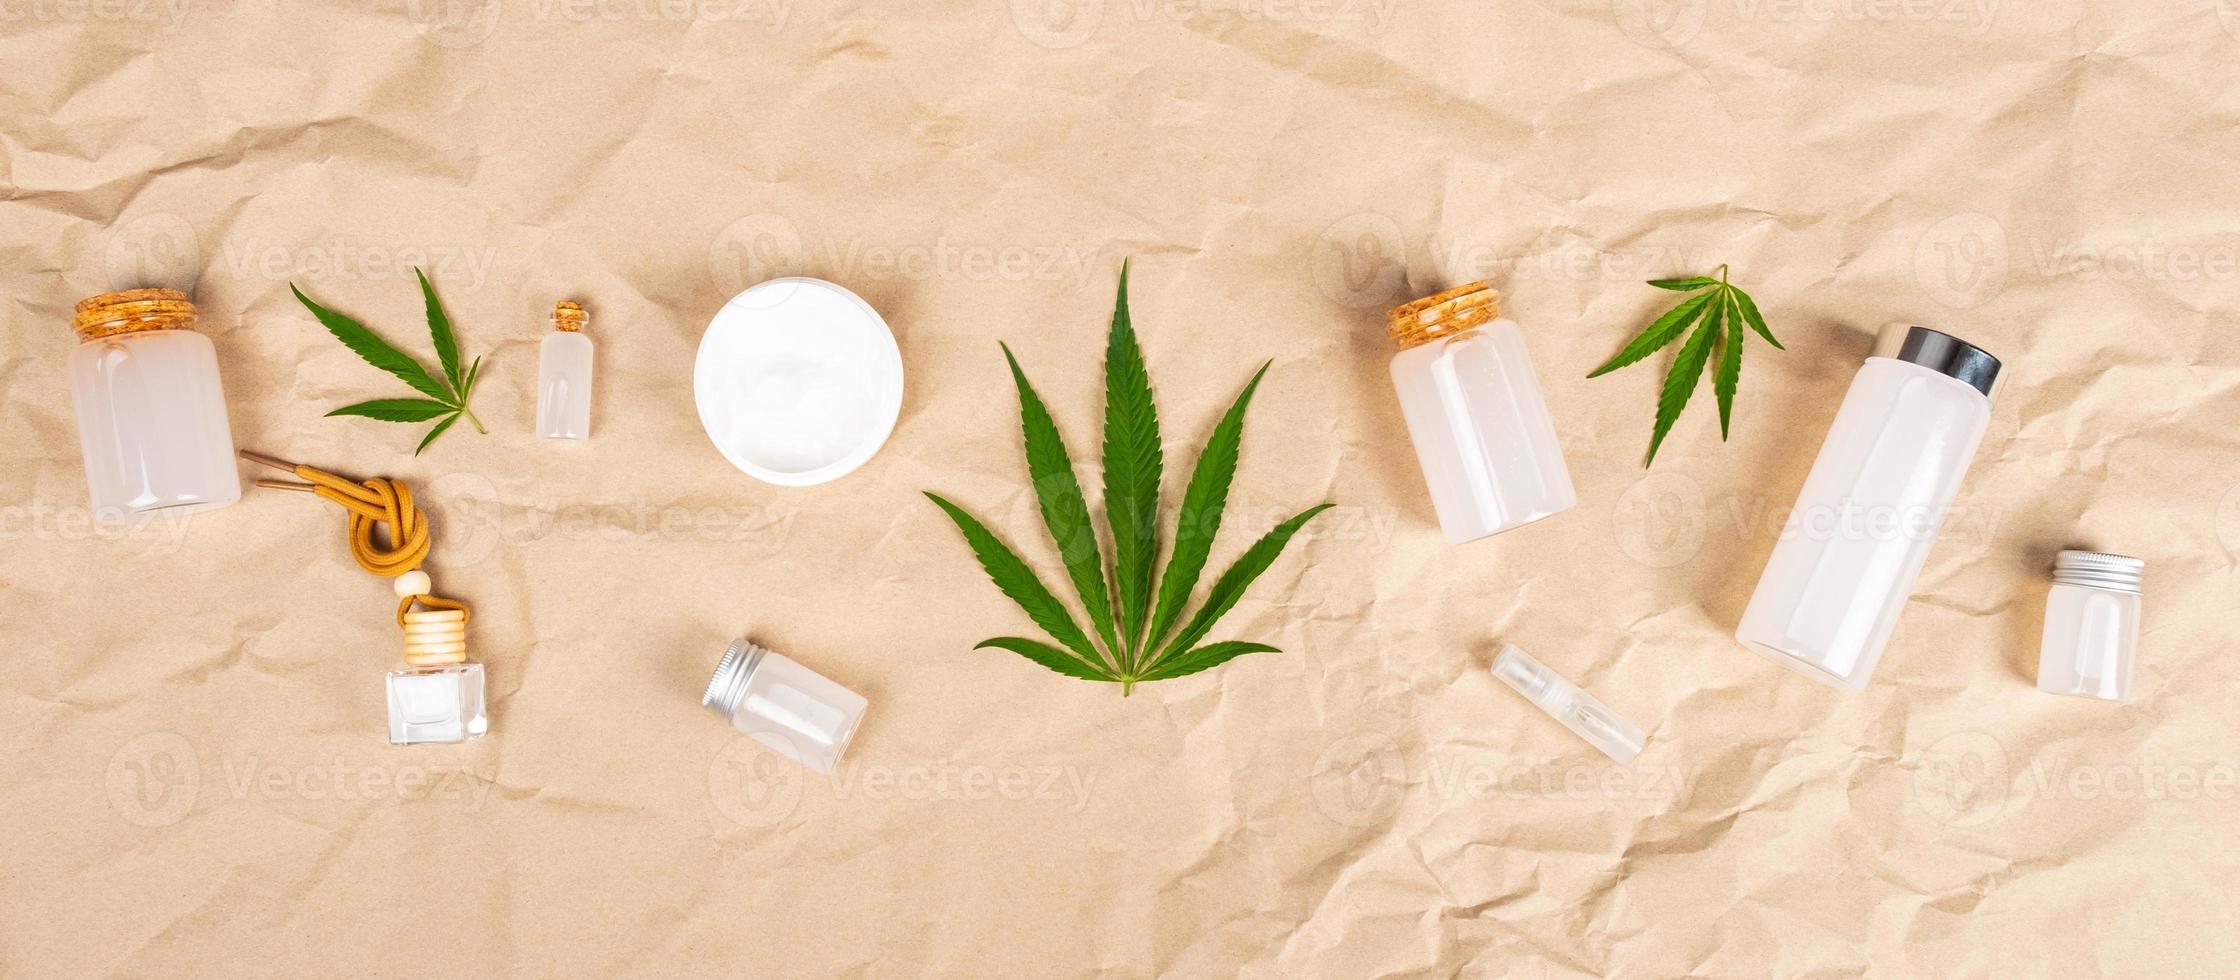 beauty skin care natural hemp cosmetics, cosmetic bottles with toner and skin cream with cannabis extract photo